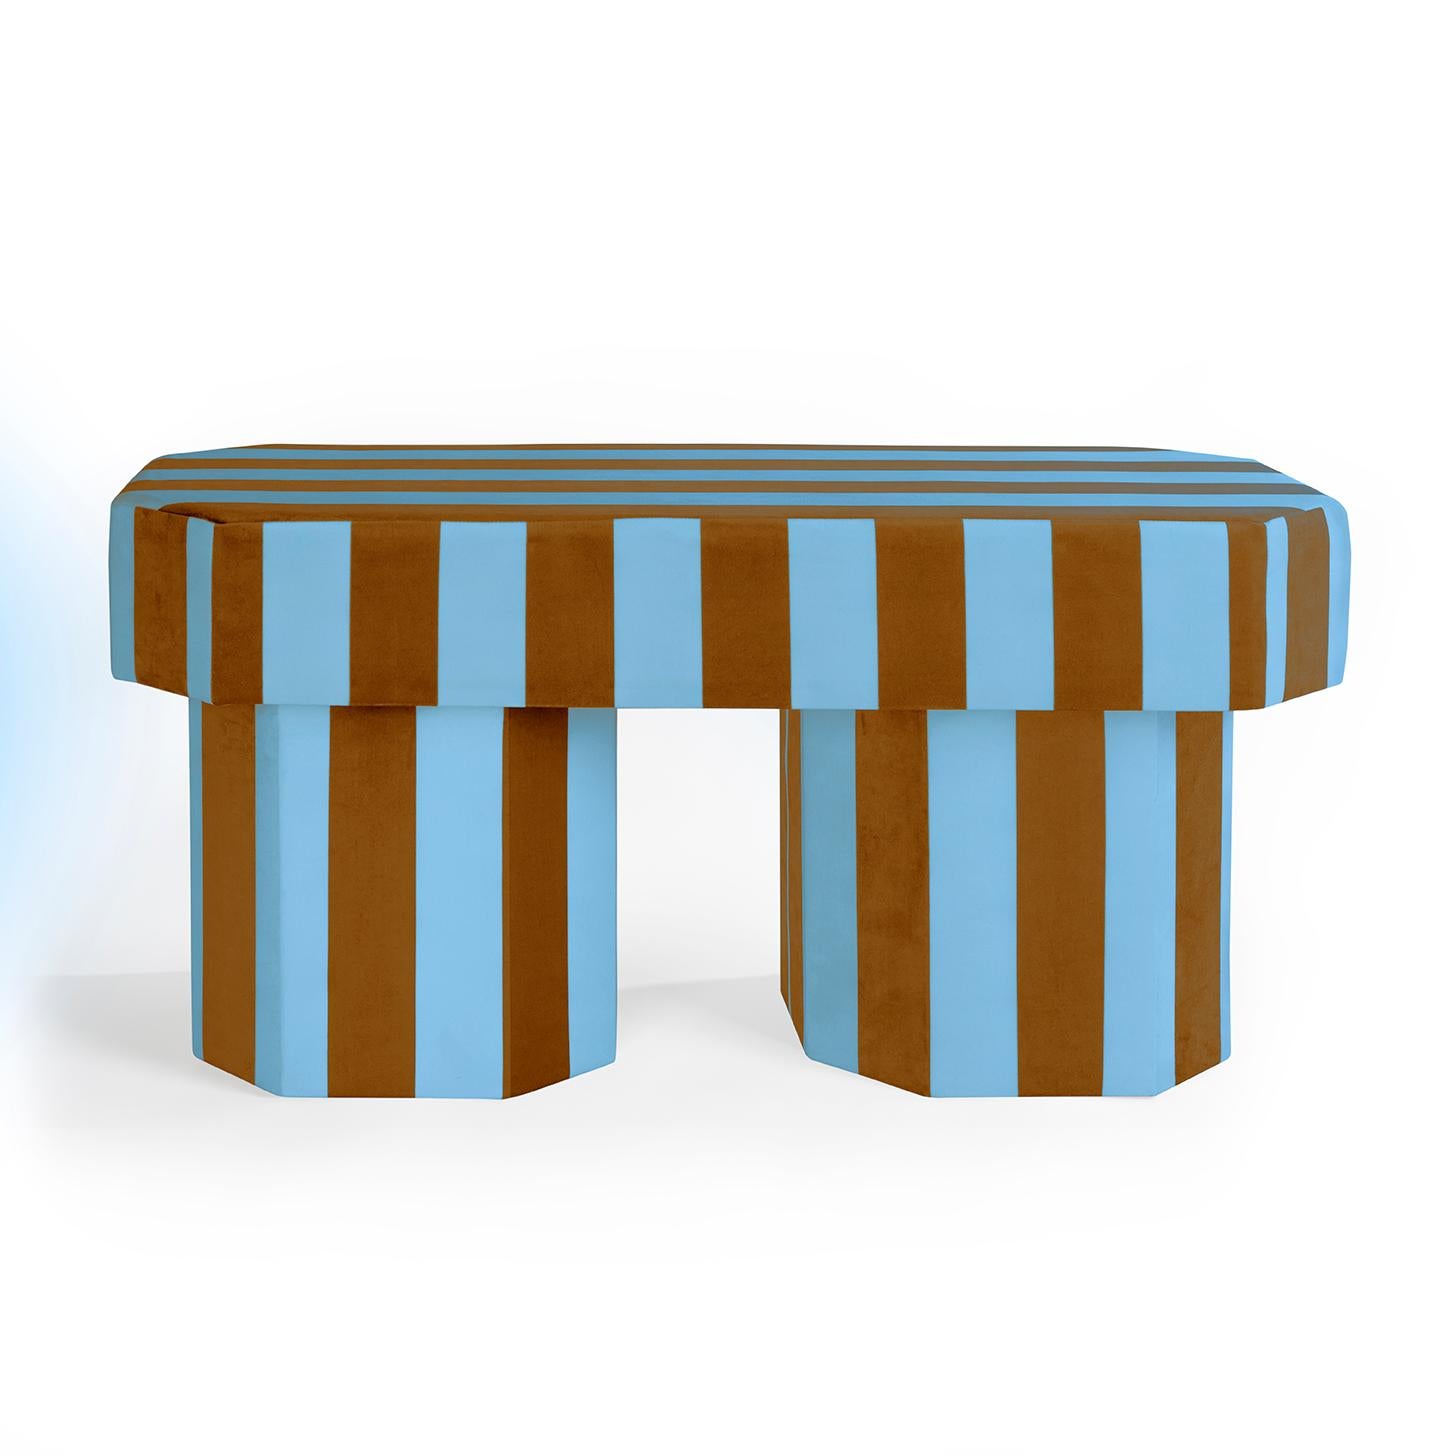 Viva Stripe Blue and Brown Bench by Houtique
Dimensions: D 100 x W 45 x H 48 cm
Materials: Velvet, Upholstery, Wood
Also available in different colours. Please contact us.

VIVA BENCH.
Designed by Carolina Mico. Made in Spain.
Upholstered bench in